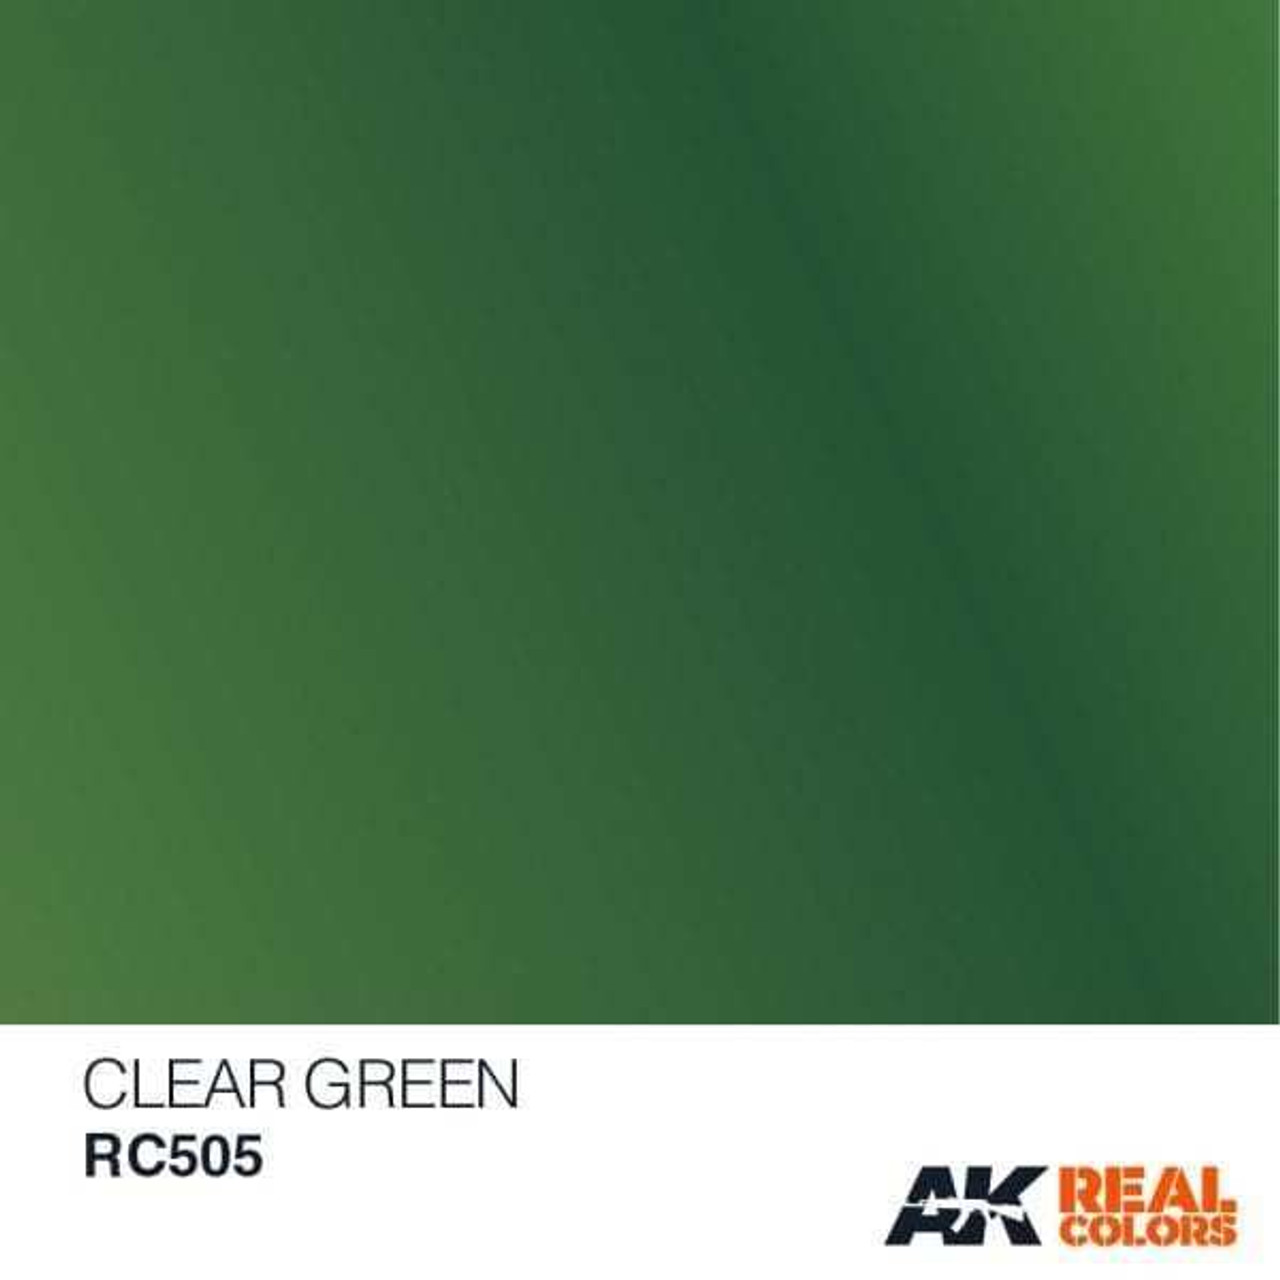 RC505 Real Colors  Clear Green Acrylic Lacquer Paint 10ml Bottle